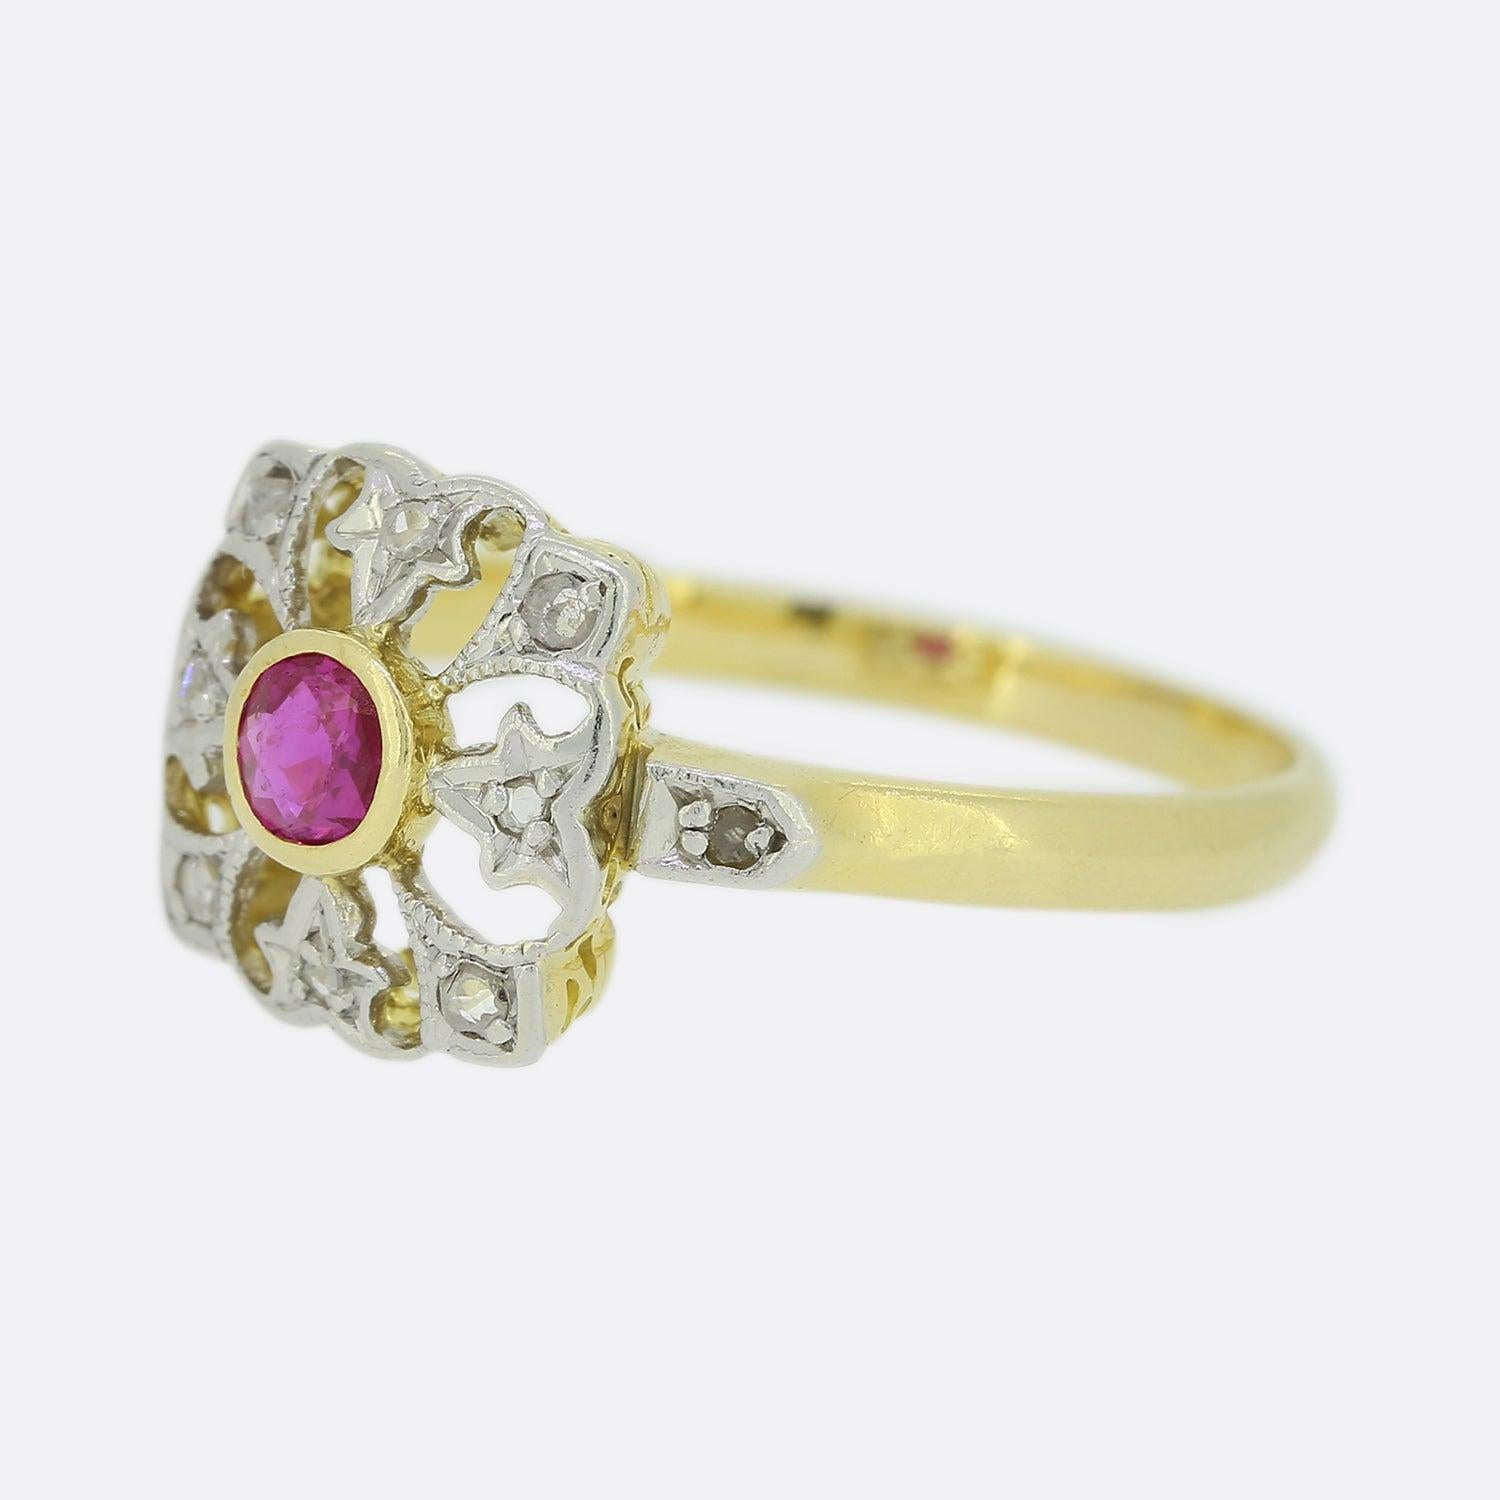 Here we have an antique ruby and diamond ring from the Edwardian era. The head of this piece has been openly crafted and showcases a centralised rub-over set pink ruby. Accentuating this focal stone is an array of rose cut diamonds; all of which